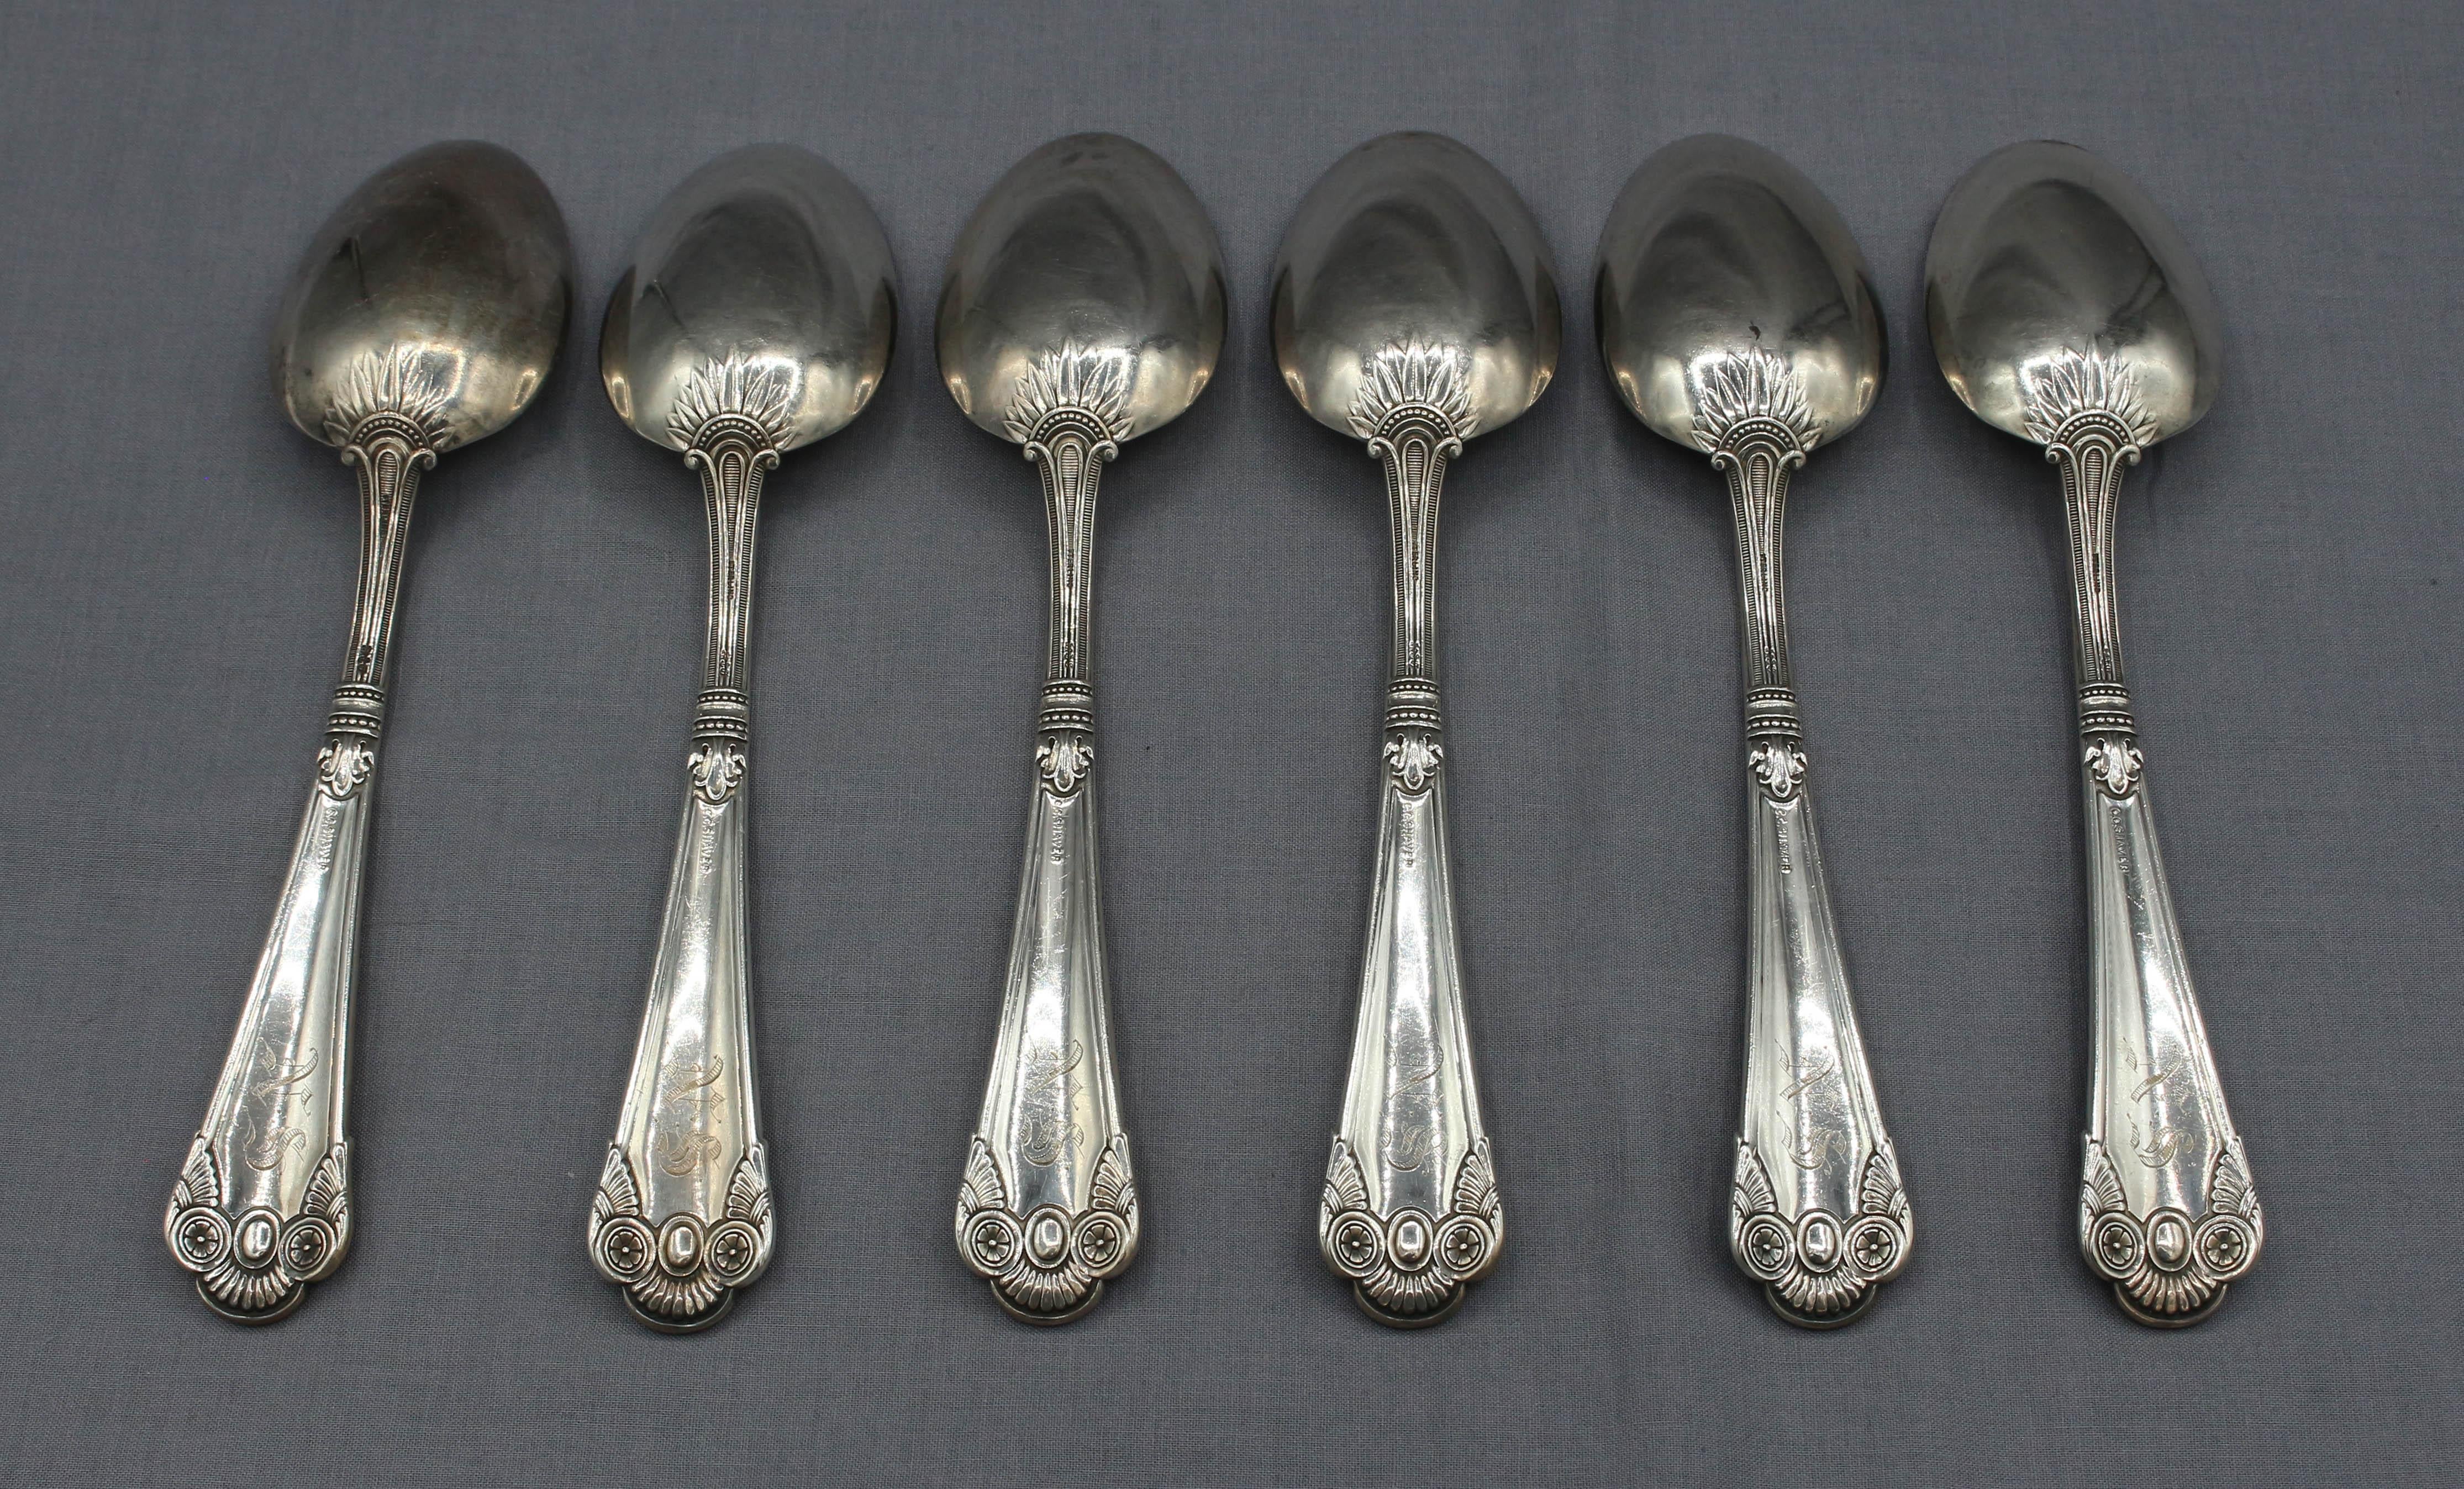 Set of 6 Gorham's Cluny sterling silver tablespoons, 1880-1883. One of the greatest silver designs of the Aesthetic Movement in America. Obverse monogram 